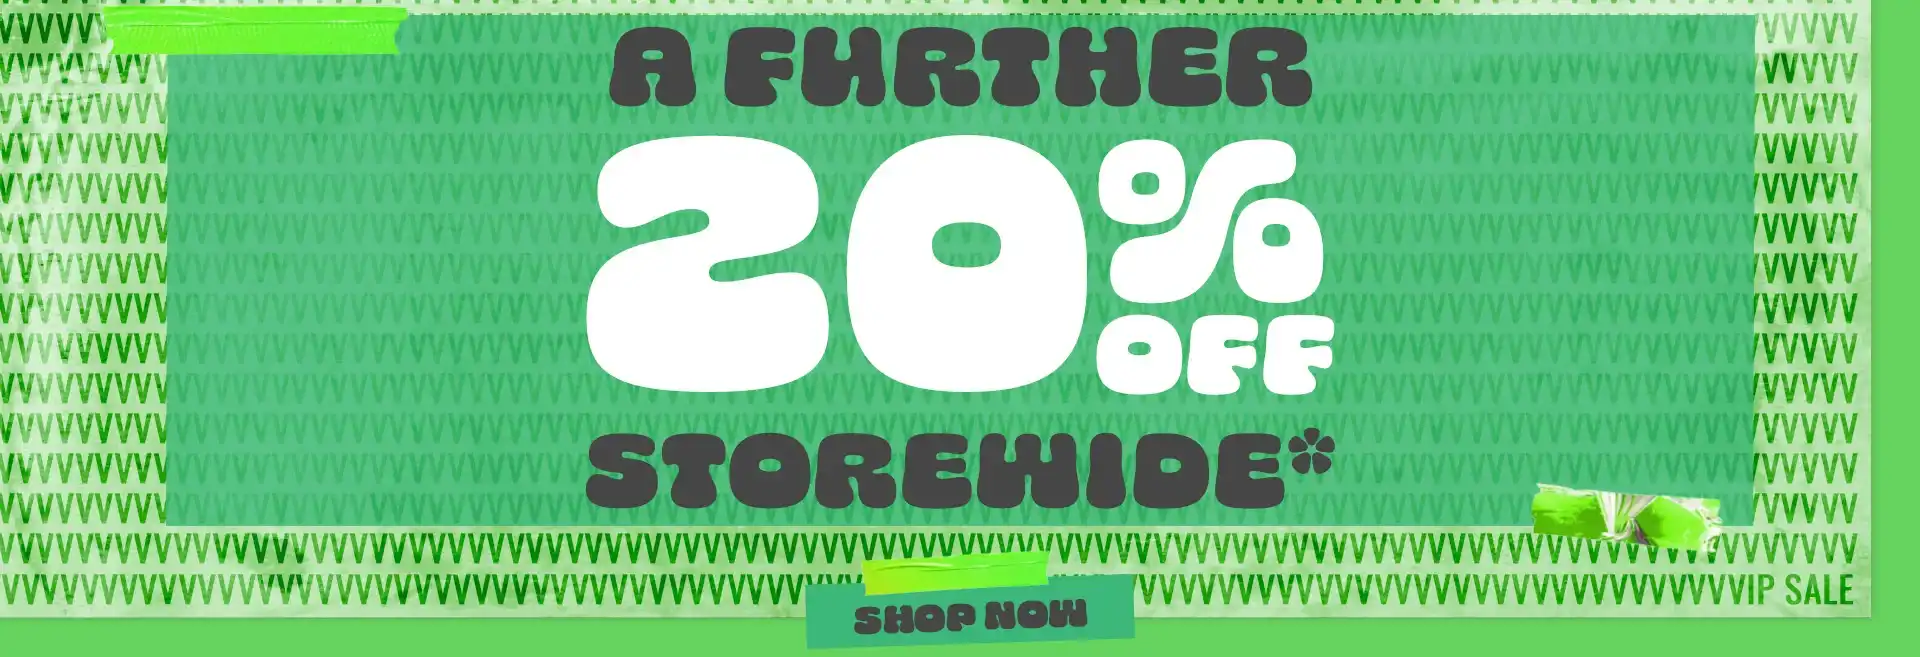 Take a further 20% OFF sitewide